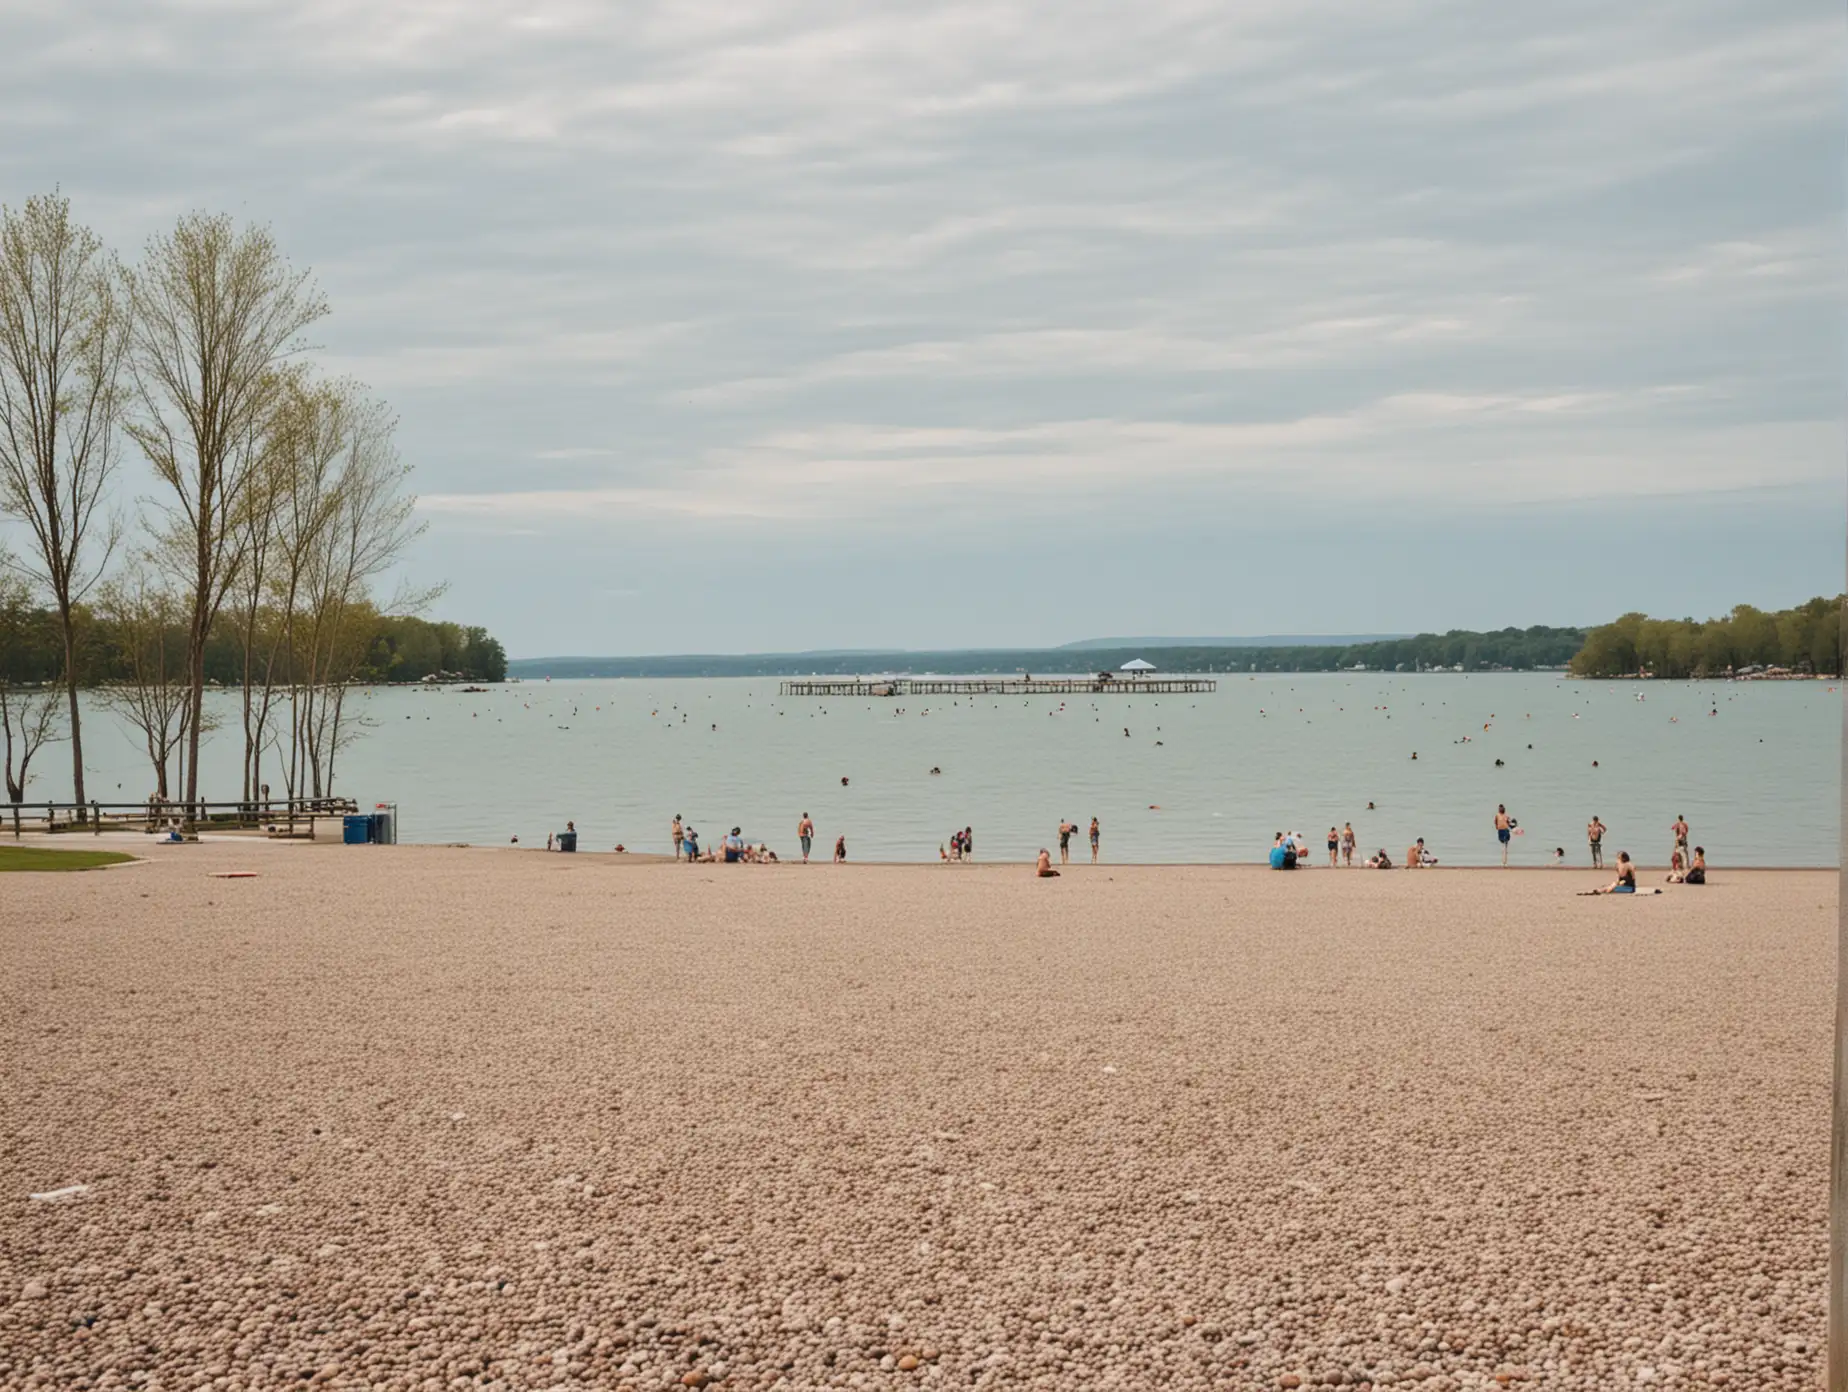 Scenic-Lakefront-Scene-with-People-Swimming